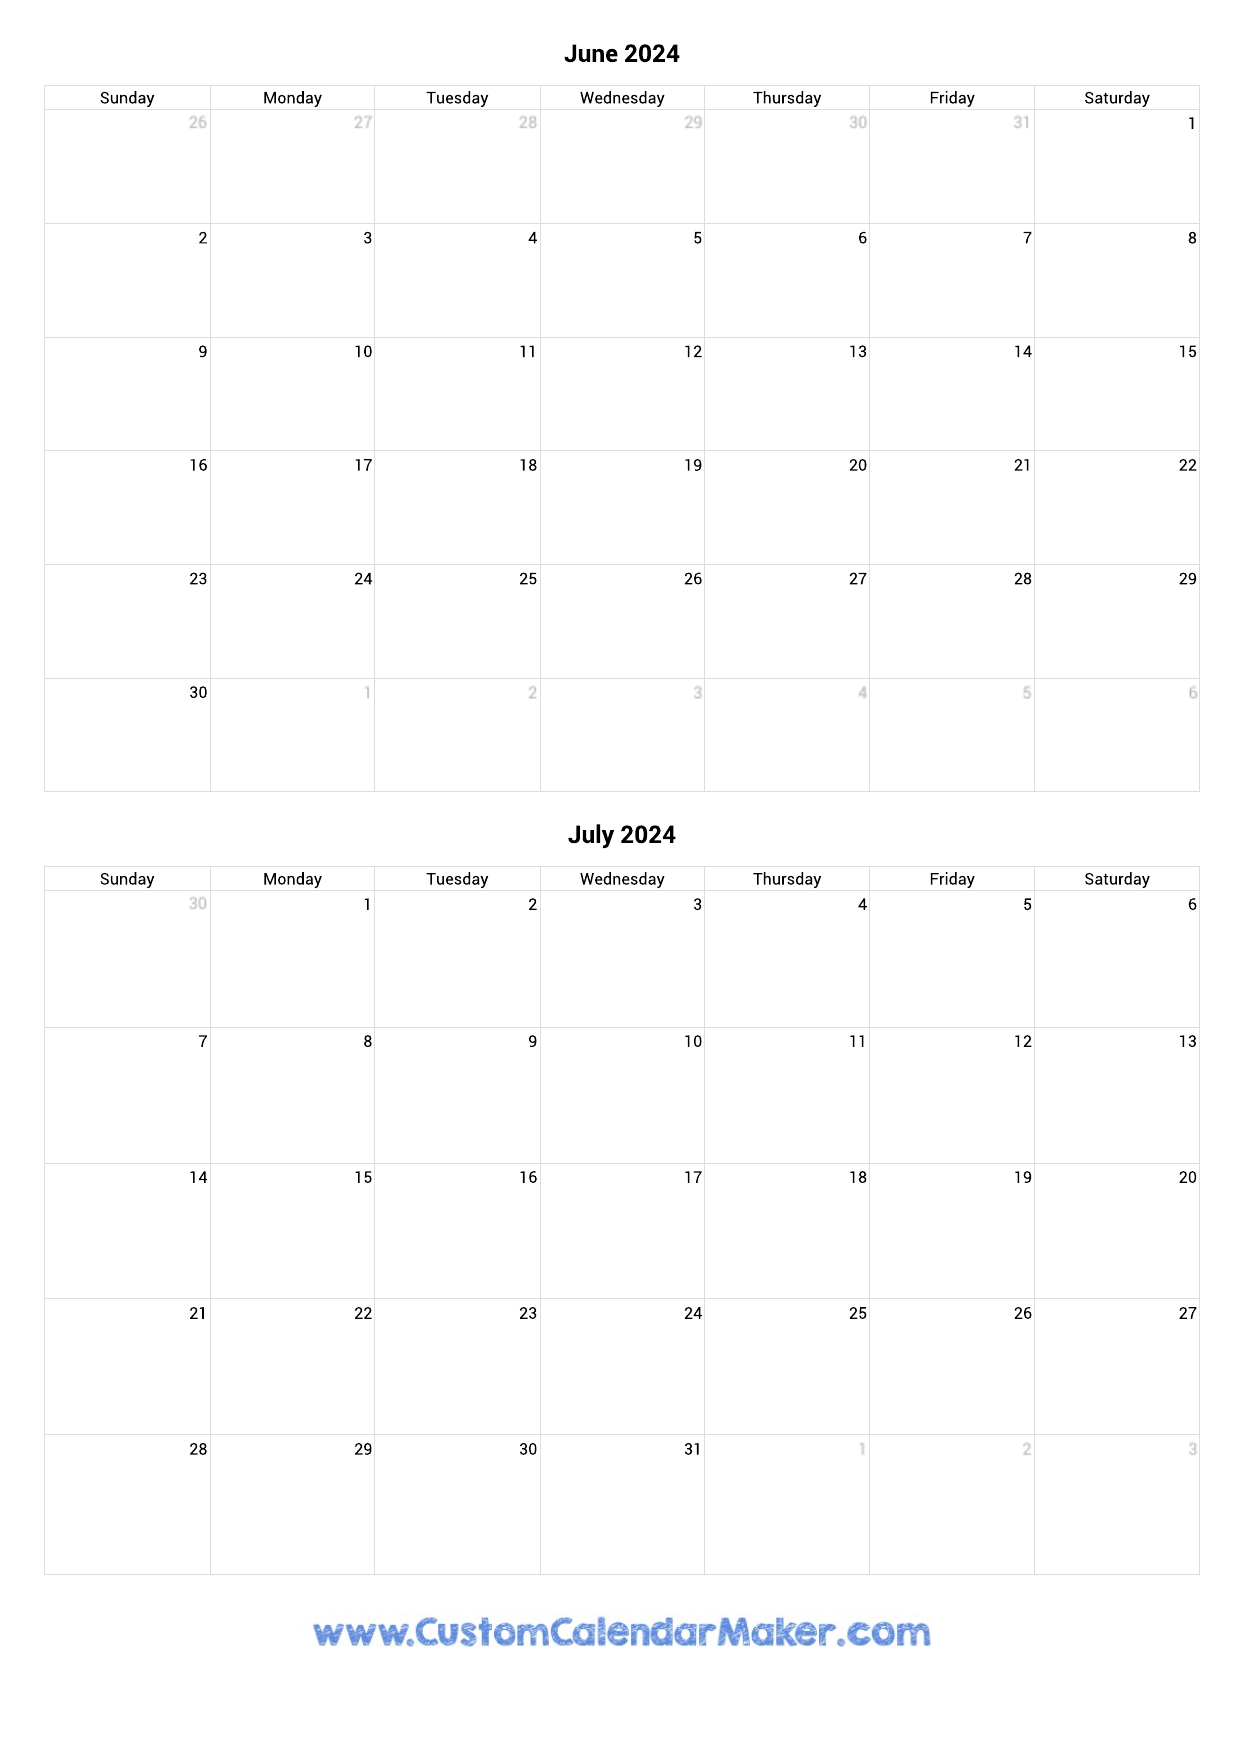 June And July 2024 Printable Calendar Template for Calendar June And July 2024 Printable